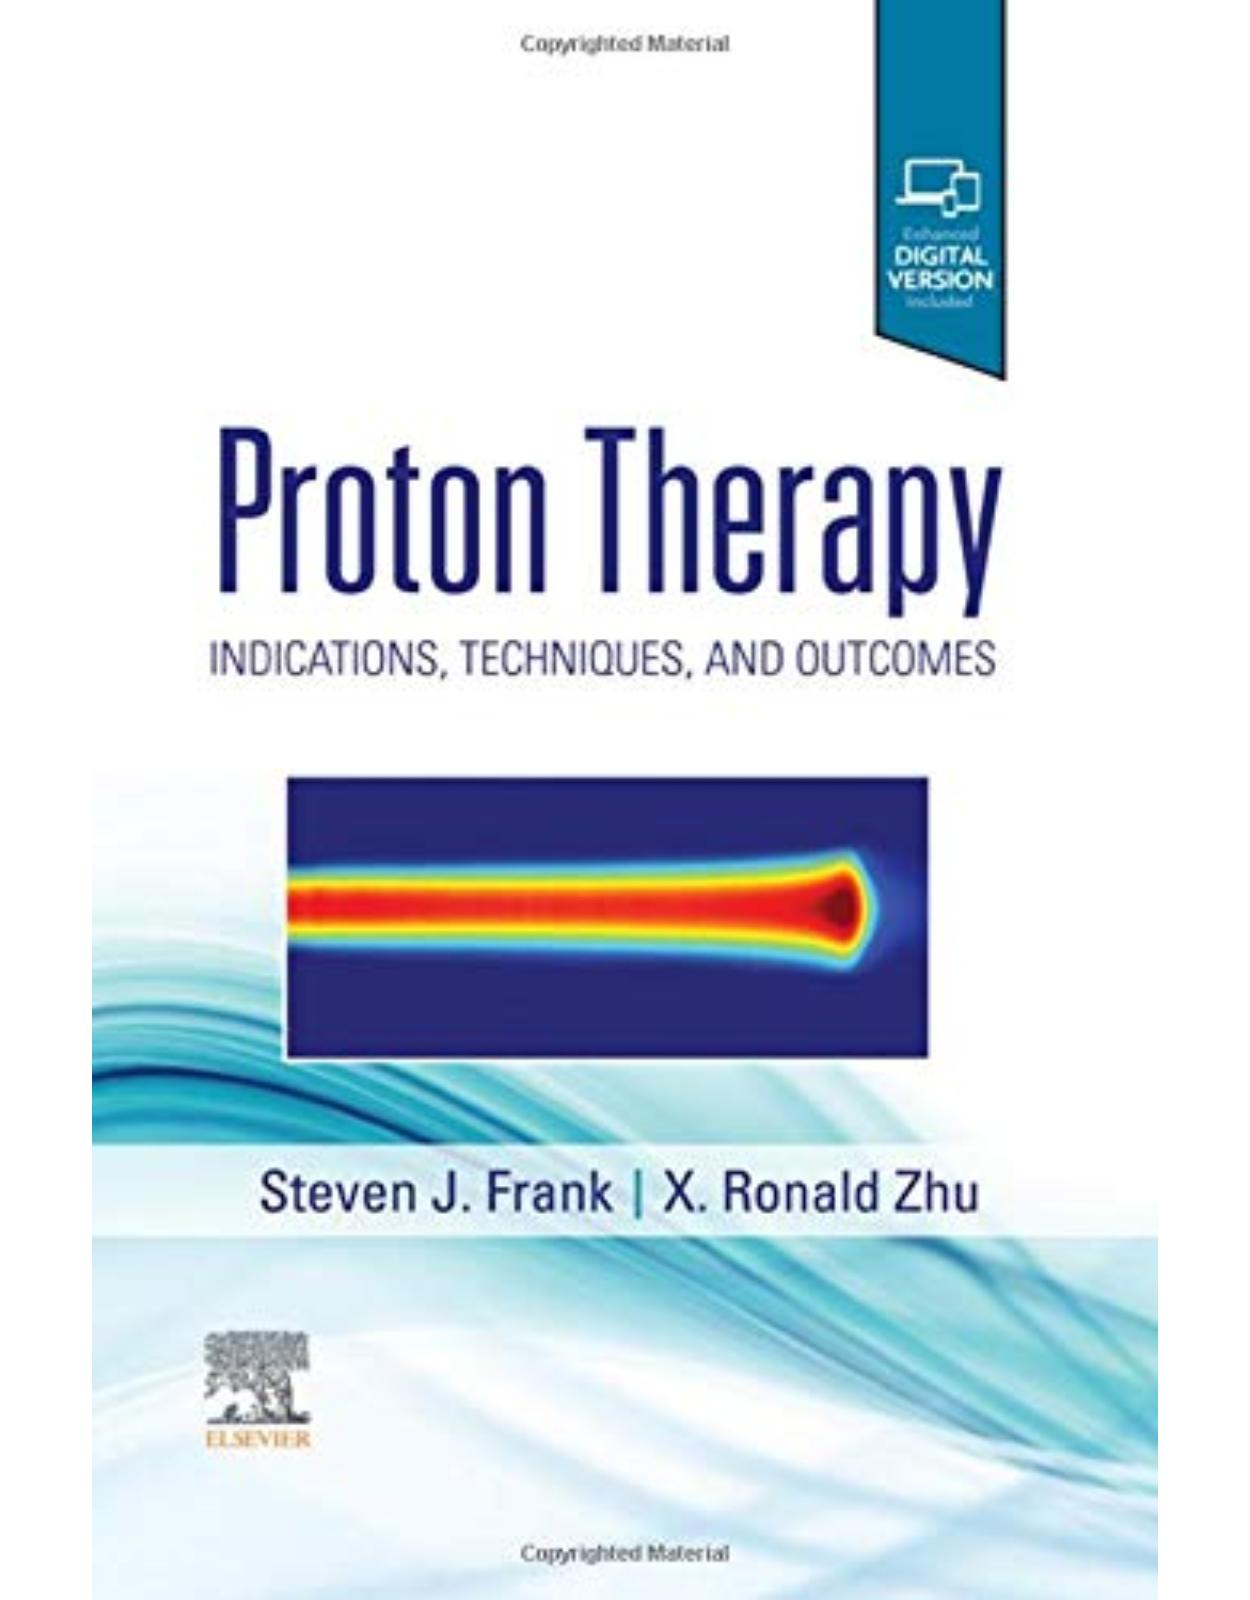 Proton Therapy: Indications, Techniques and Outcomes 